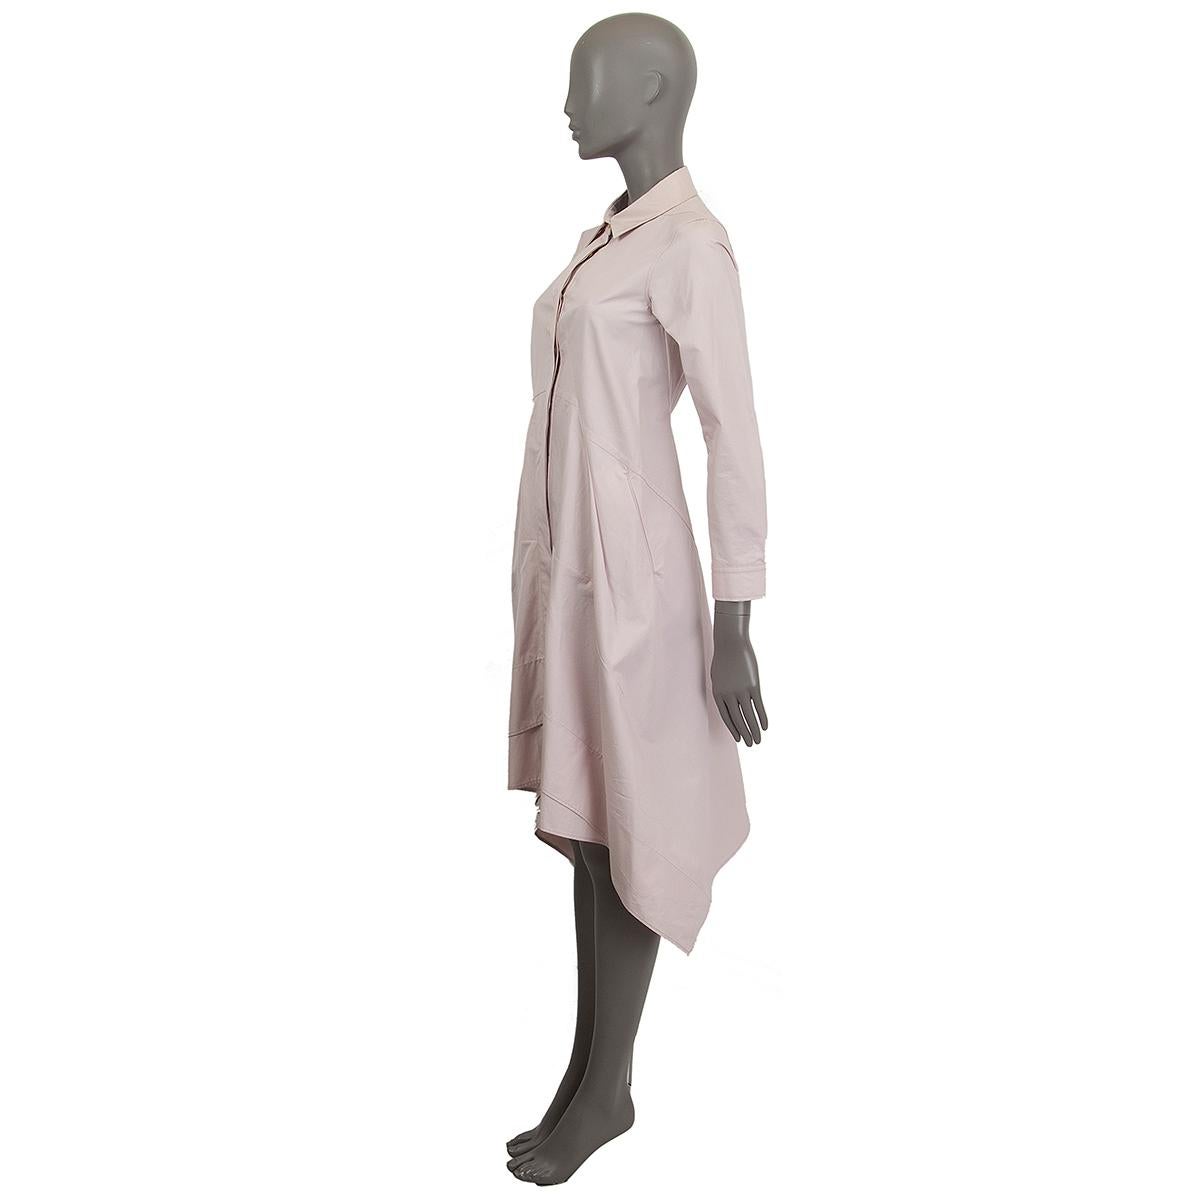 100% authentic Jil Sander longsleeve flared structured shirt dress in pale pink cotton (100%) lined in cotton (74%) and silk (26%). Opens with hidden buttons and has two slit pockets on the side featuring jagged edge. Has been worn and is in